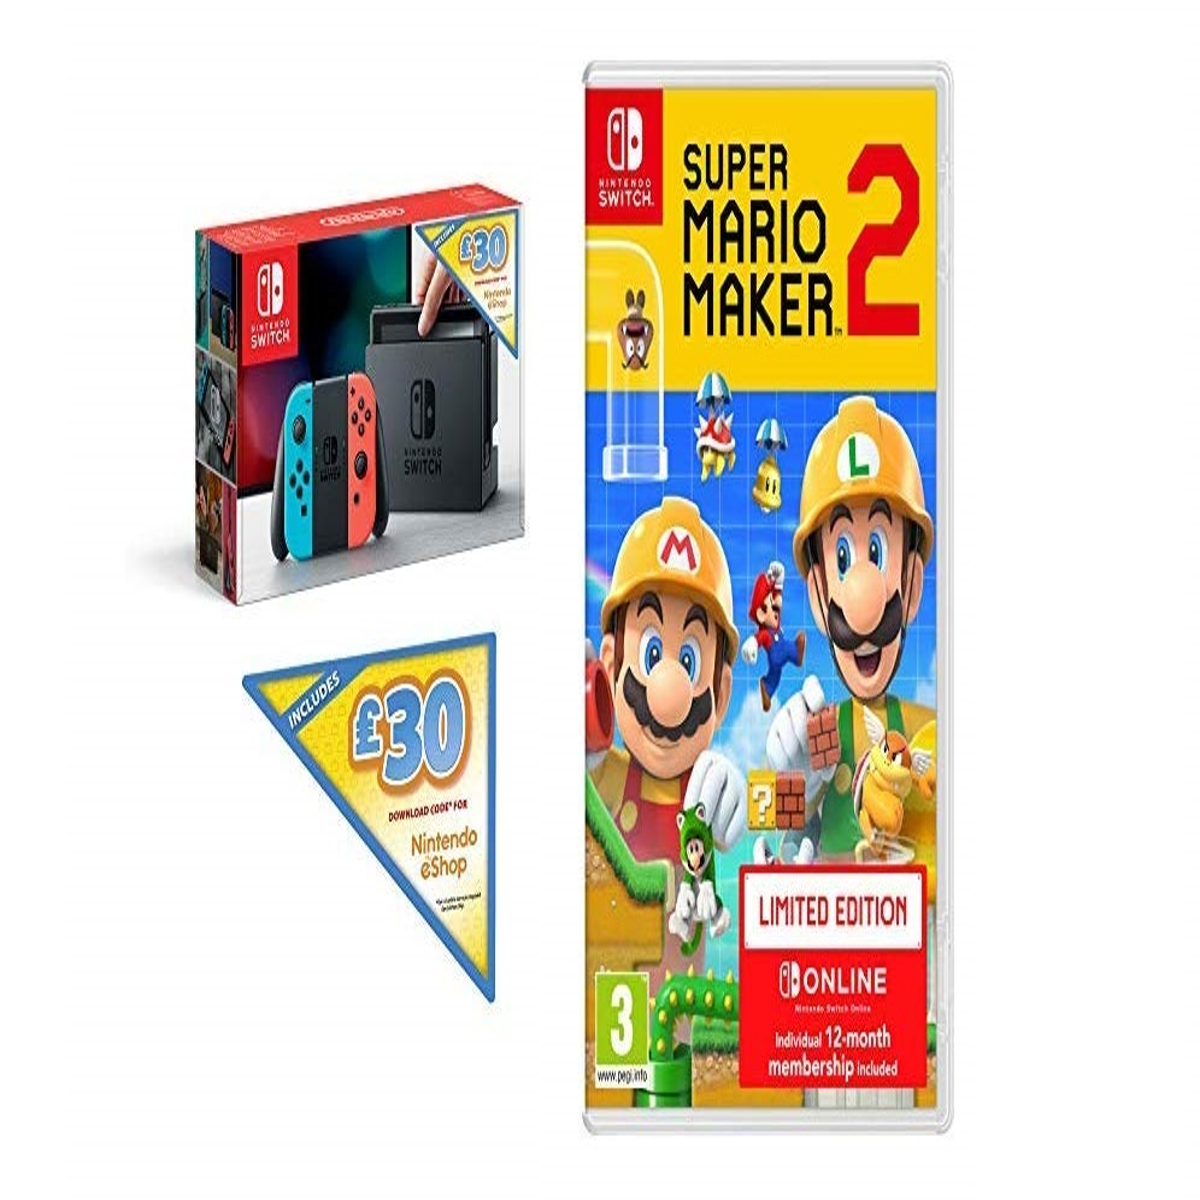 This Nintendo a 12 Mario £300 Online Maker Switch Switch for months\' and deal £30 voucher 2, includes eShop just